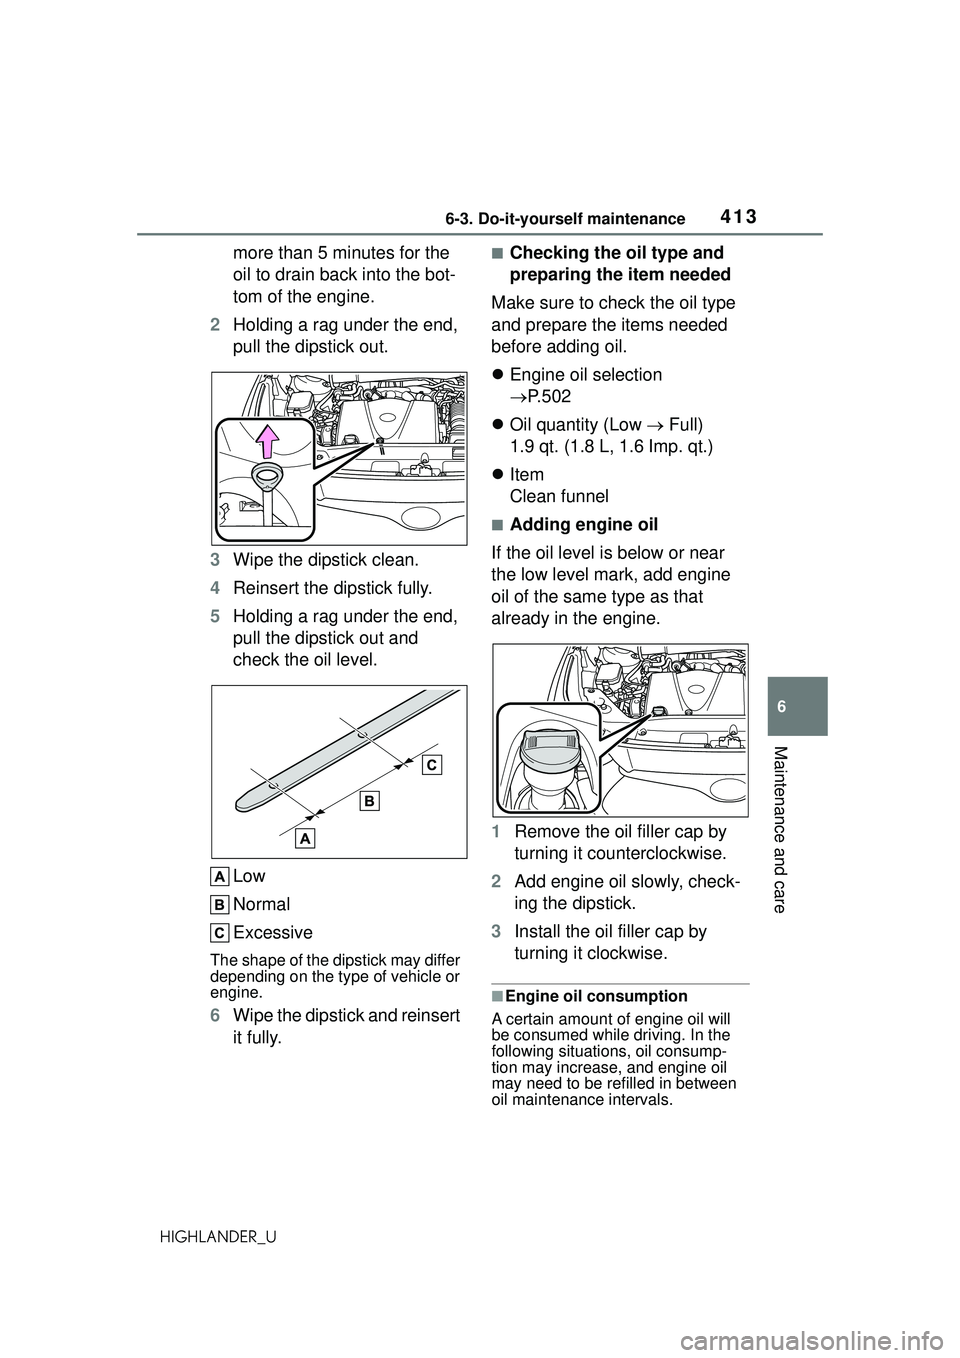 TOYOTA HIGHLANDER 2021  Owners Manual (in English) 4136-3. Do-it-yourself maintenance
6
Maintenance and care
HIGHLANDER_U
more than 5 minutes for the 
oil to drain back into the bot-
tom of the engine.
2 Holding a rag under the end, 
pull the dipstick